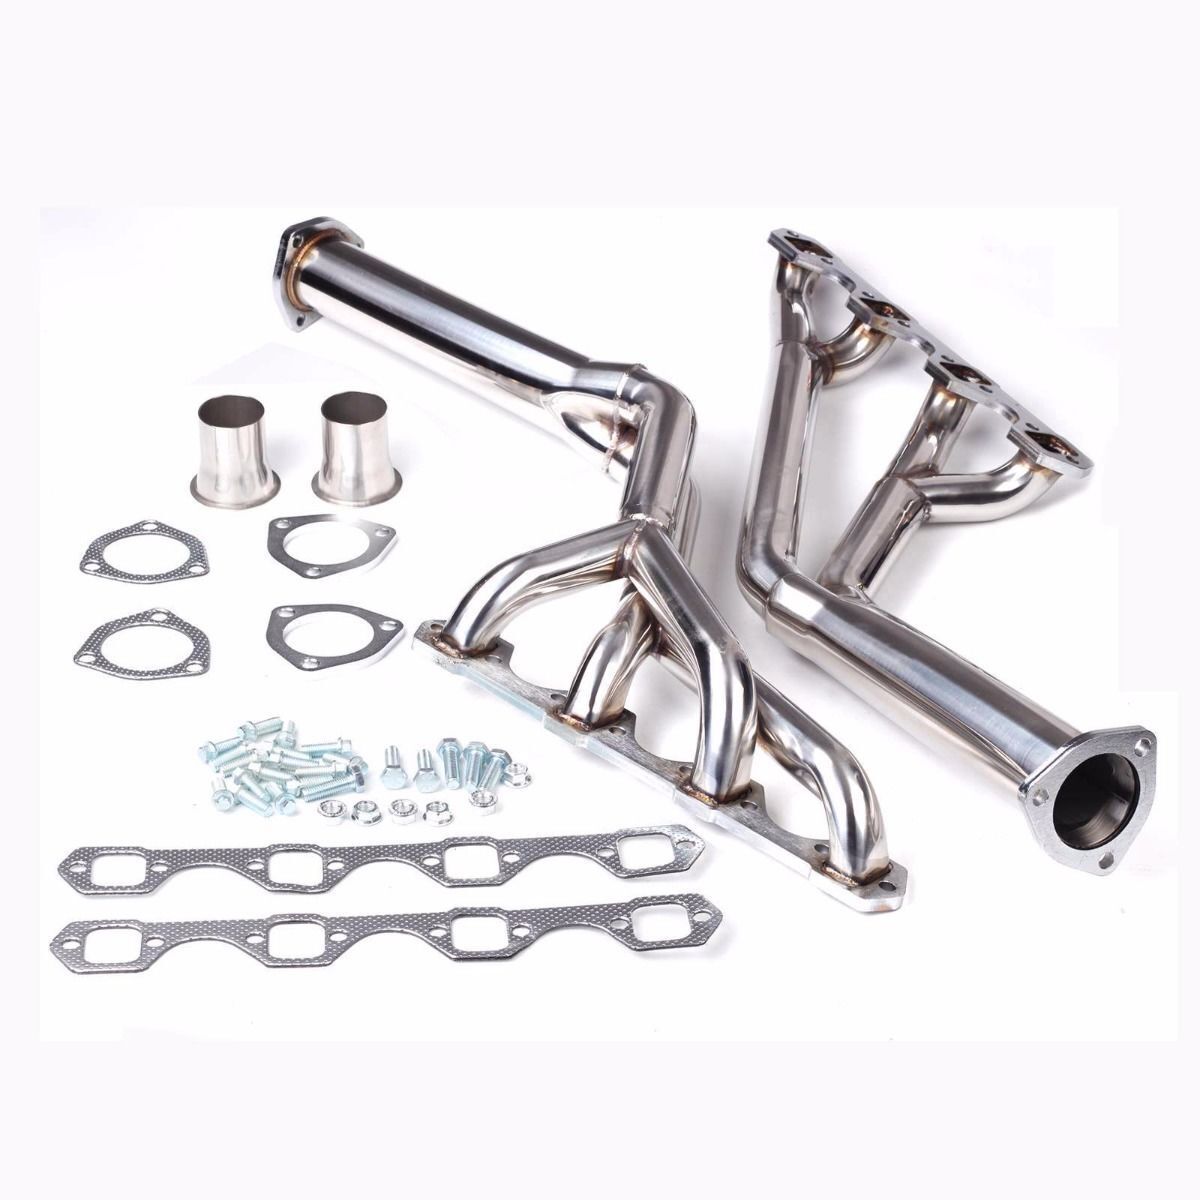 Stainless Manifold Header for Mercury Cyclone Comet Montego Villager Caliente